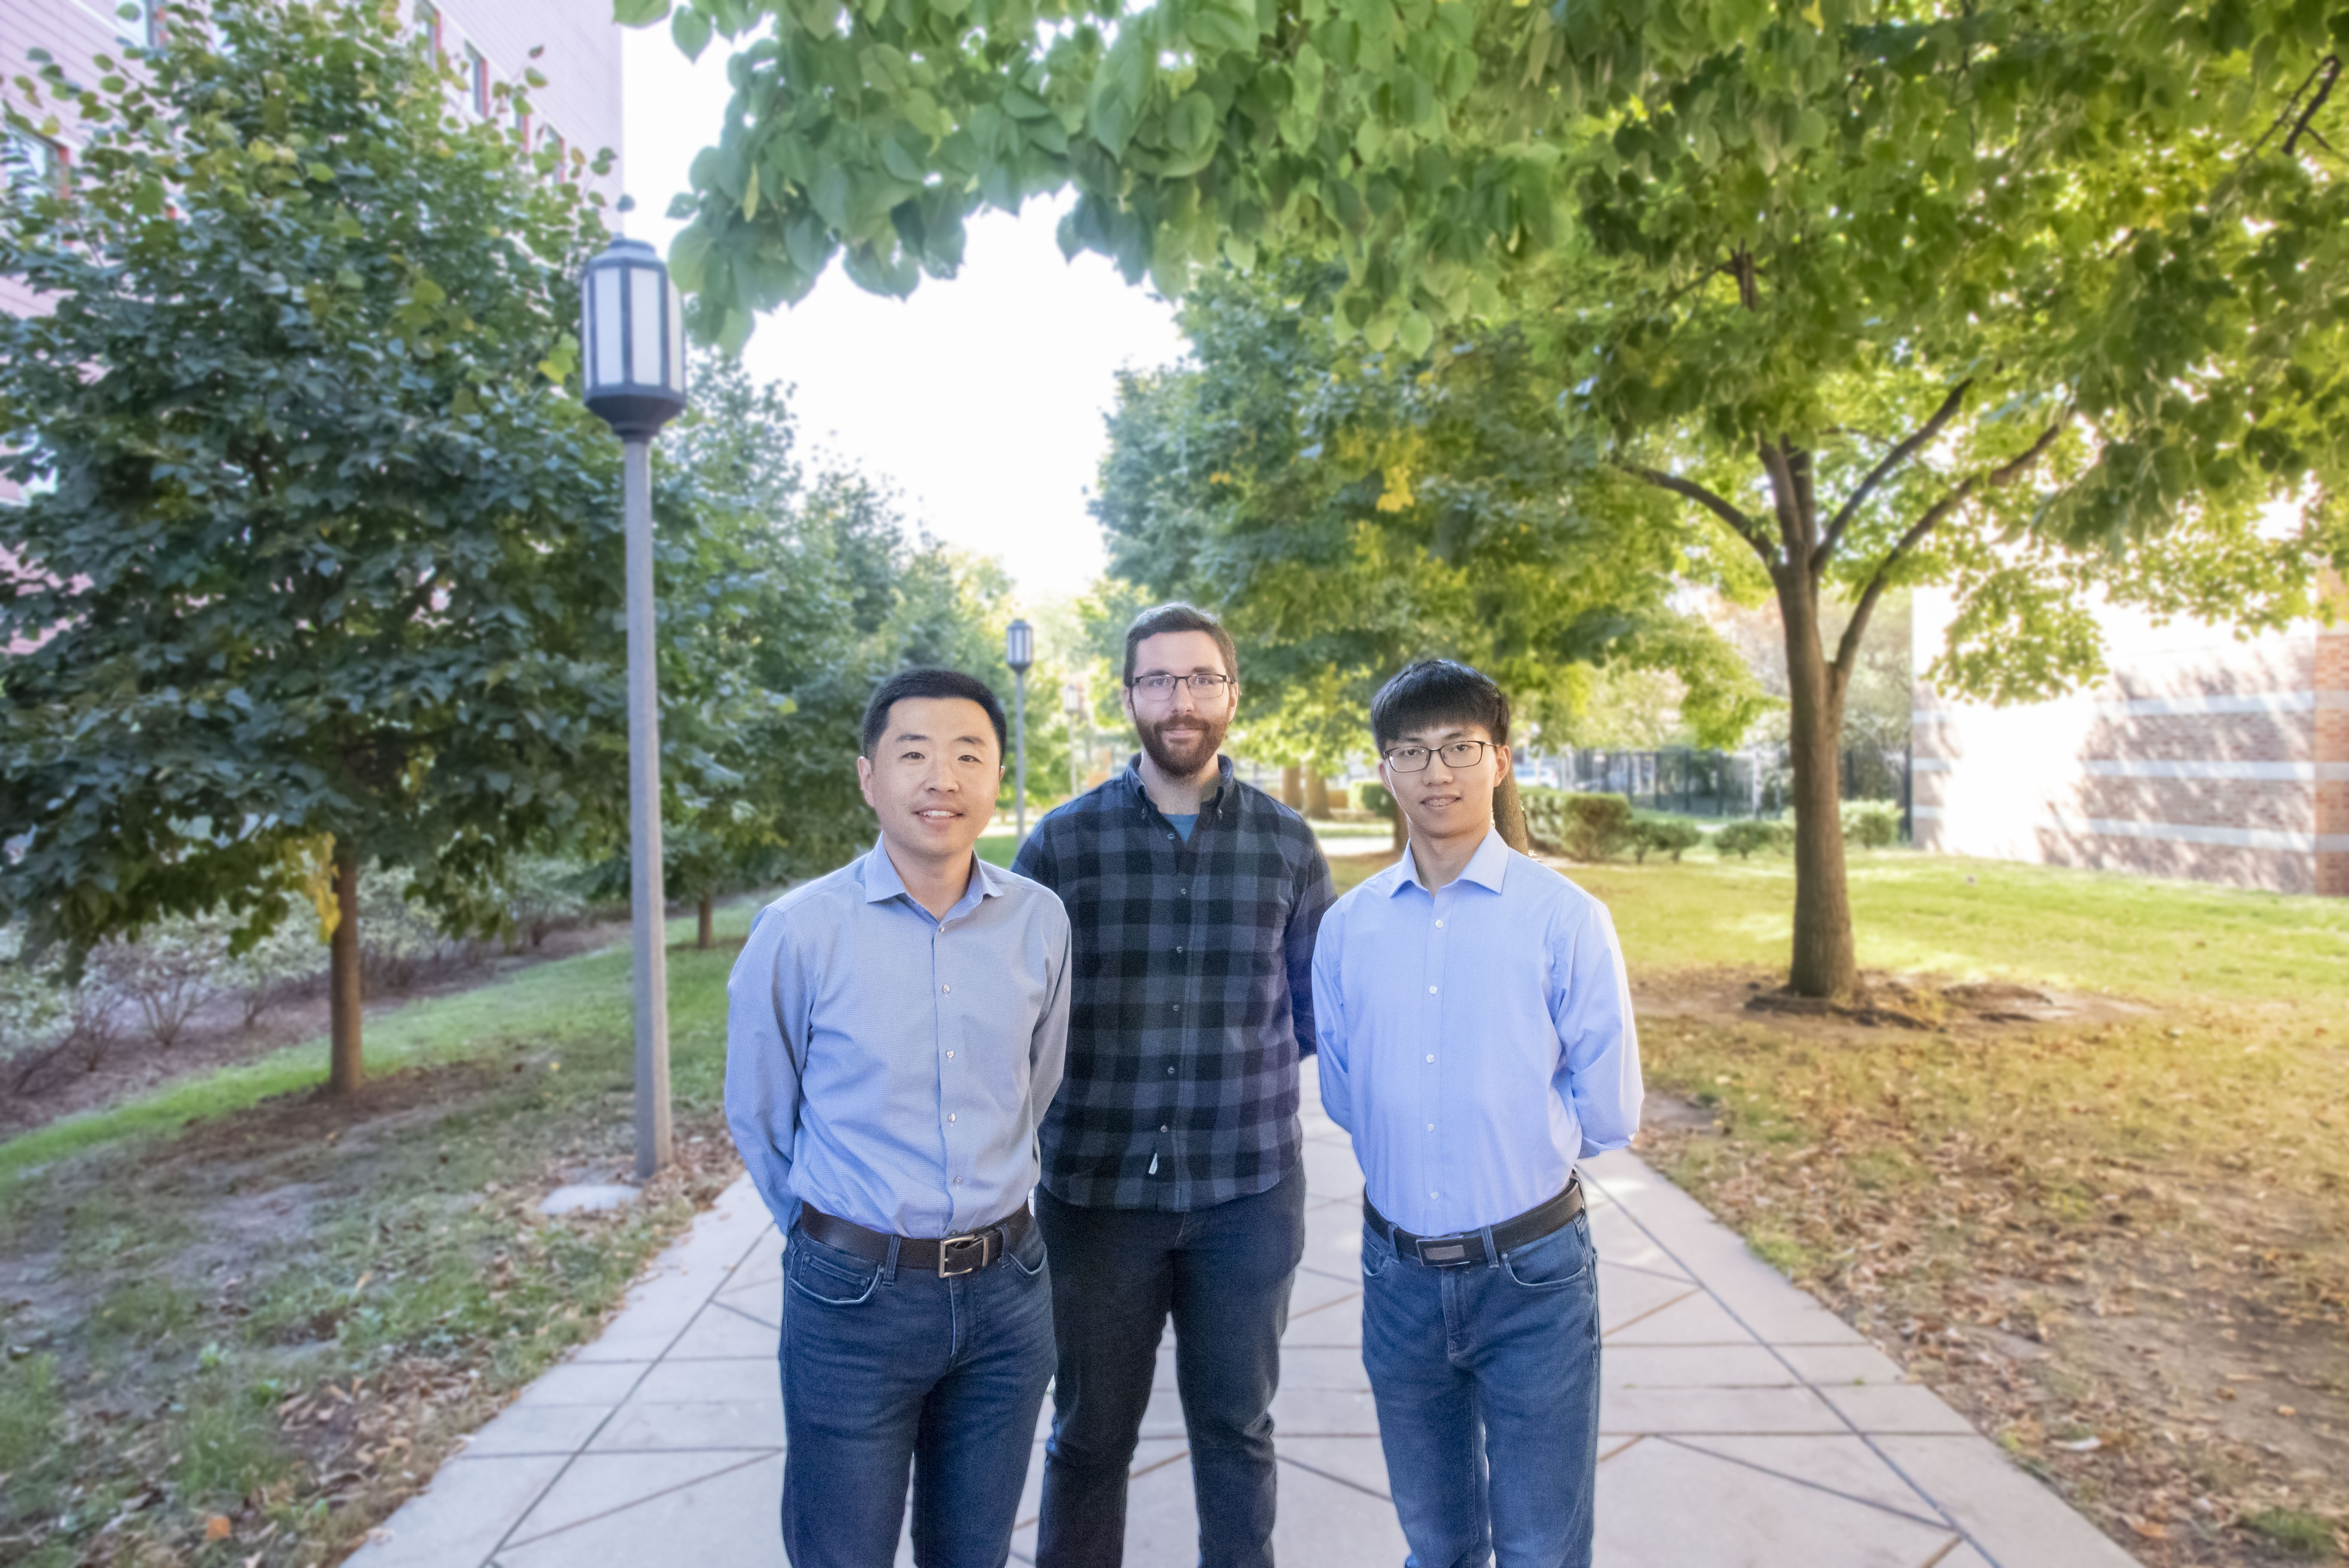 Pengfei Song, Matthew Lowerison, and Zhijie Dong stand on the pathway in front of the Beckman Institute.